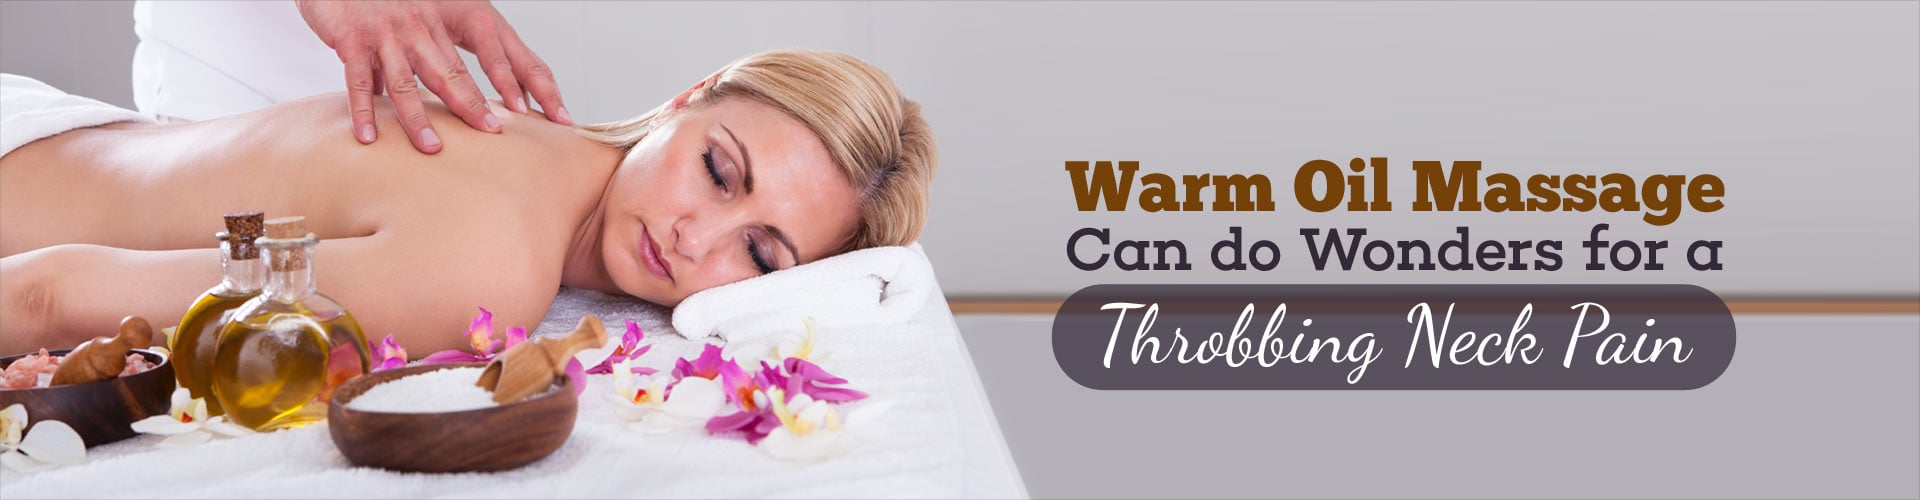 A Warm Oil Massage Can do Wonders for A Throbbing Neck Pain
